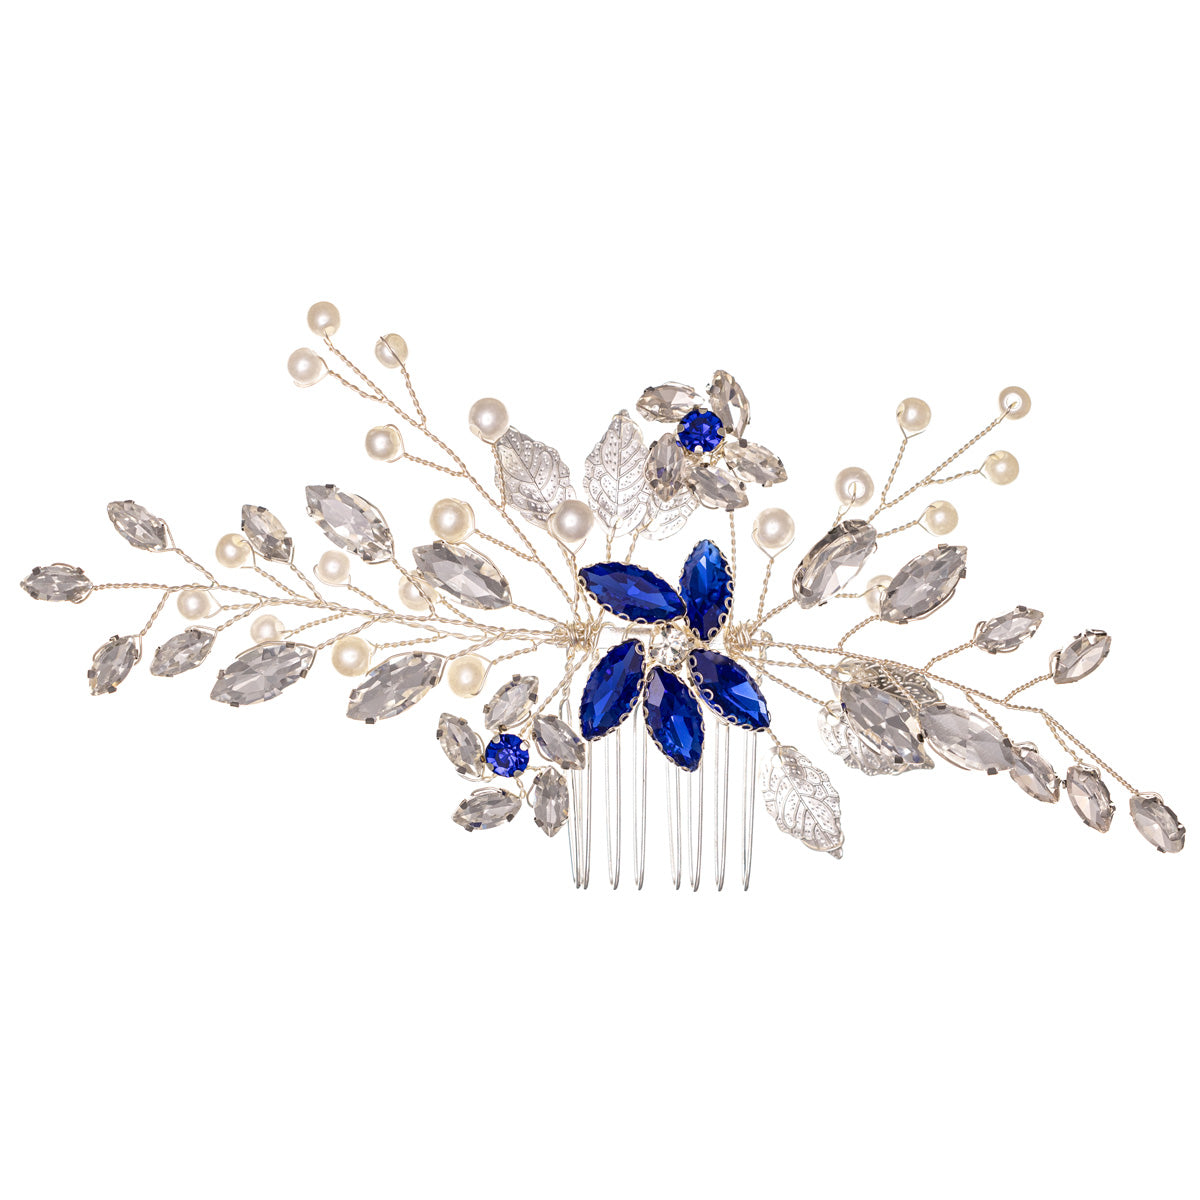 Exquisite headband with comb leaves and pearls